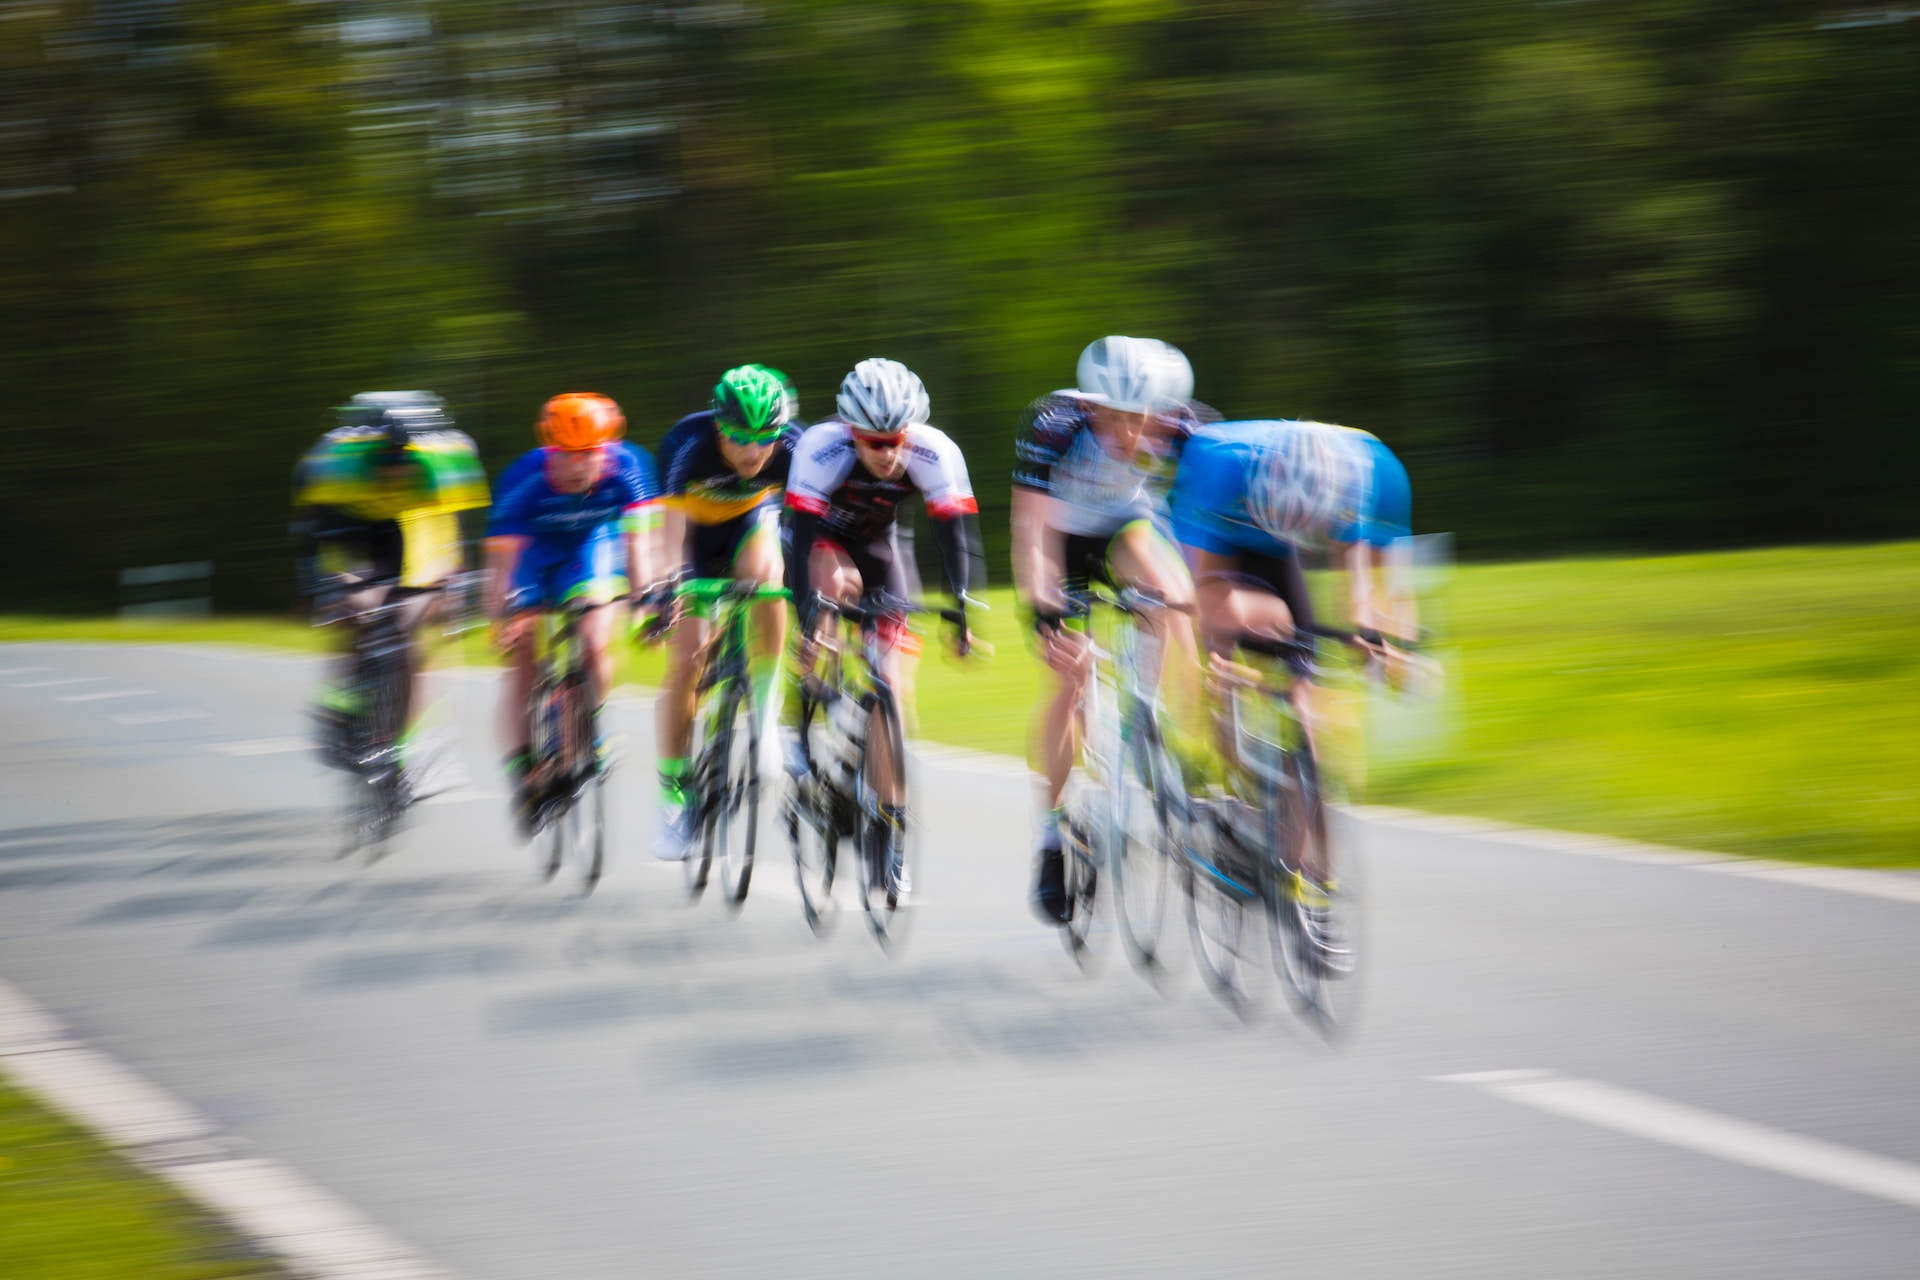 the image shows a cycling triathlon race